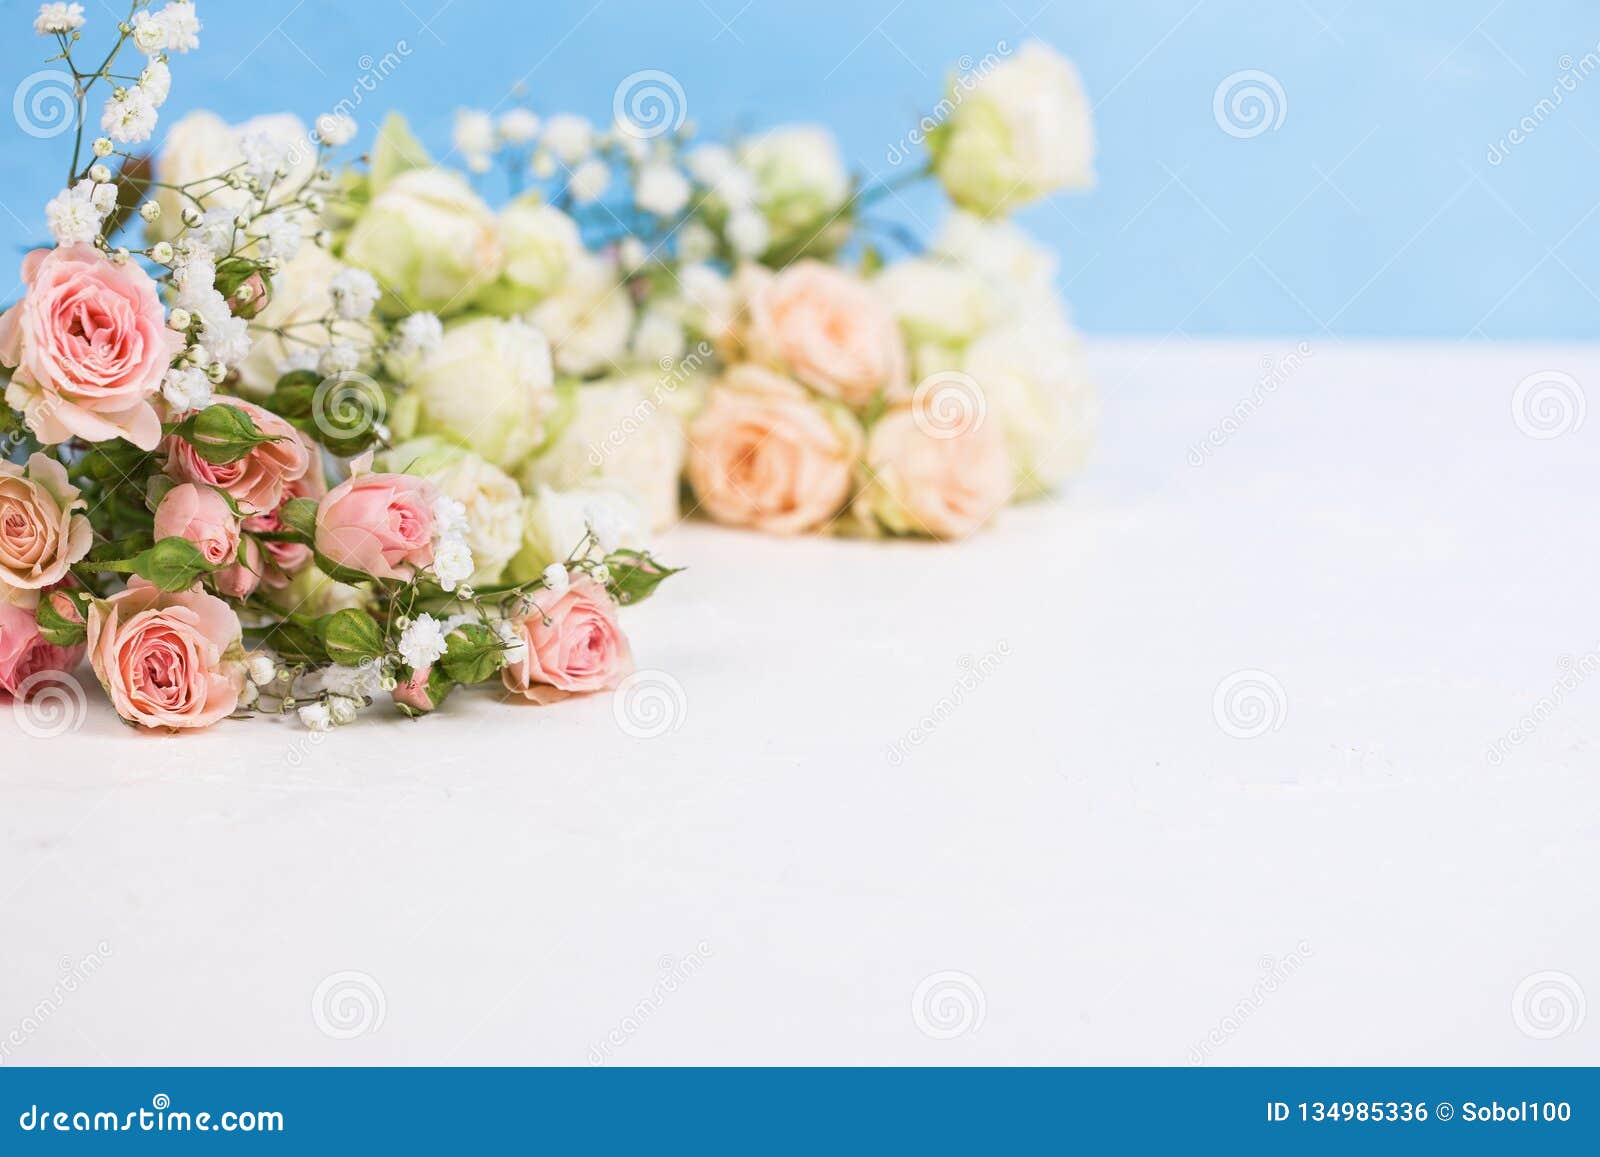 border from fresh white gypsofila and white rose flowers against blue textured background